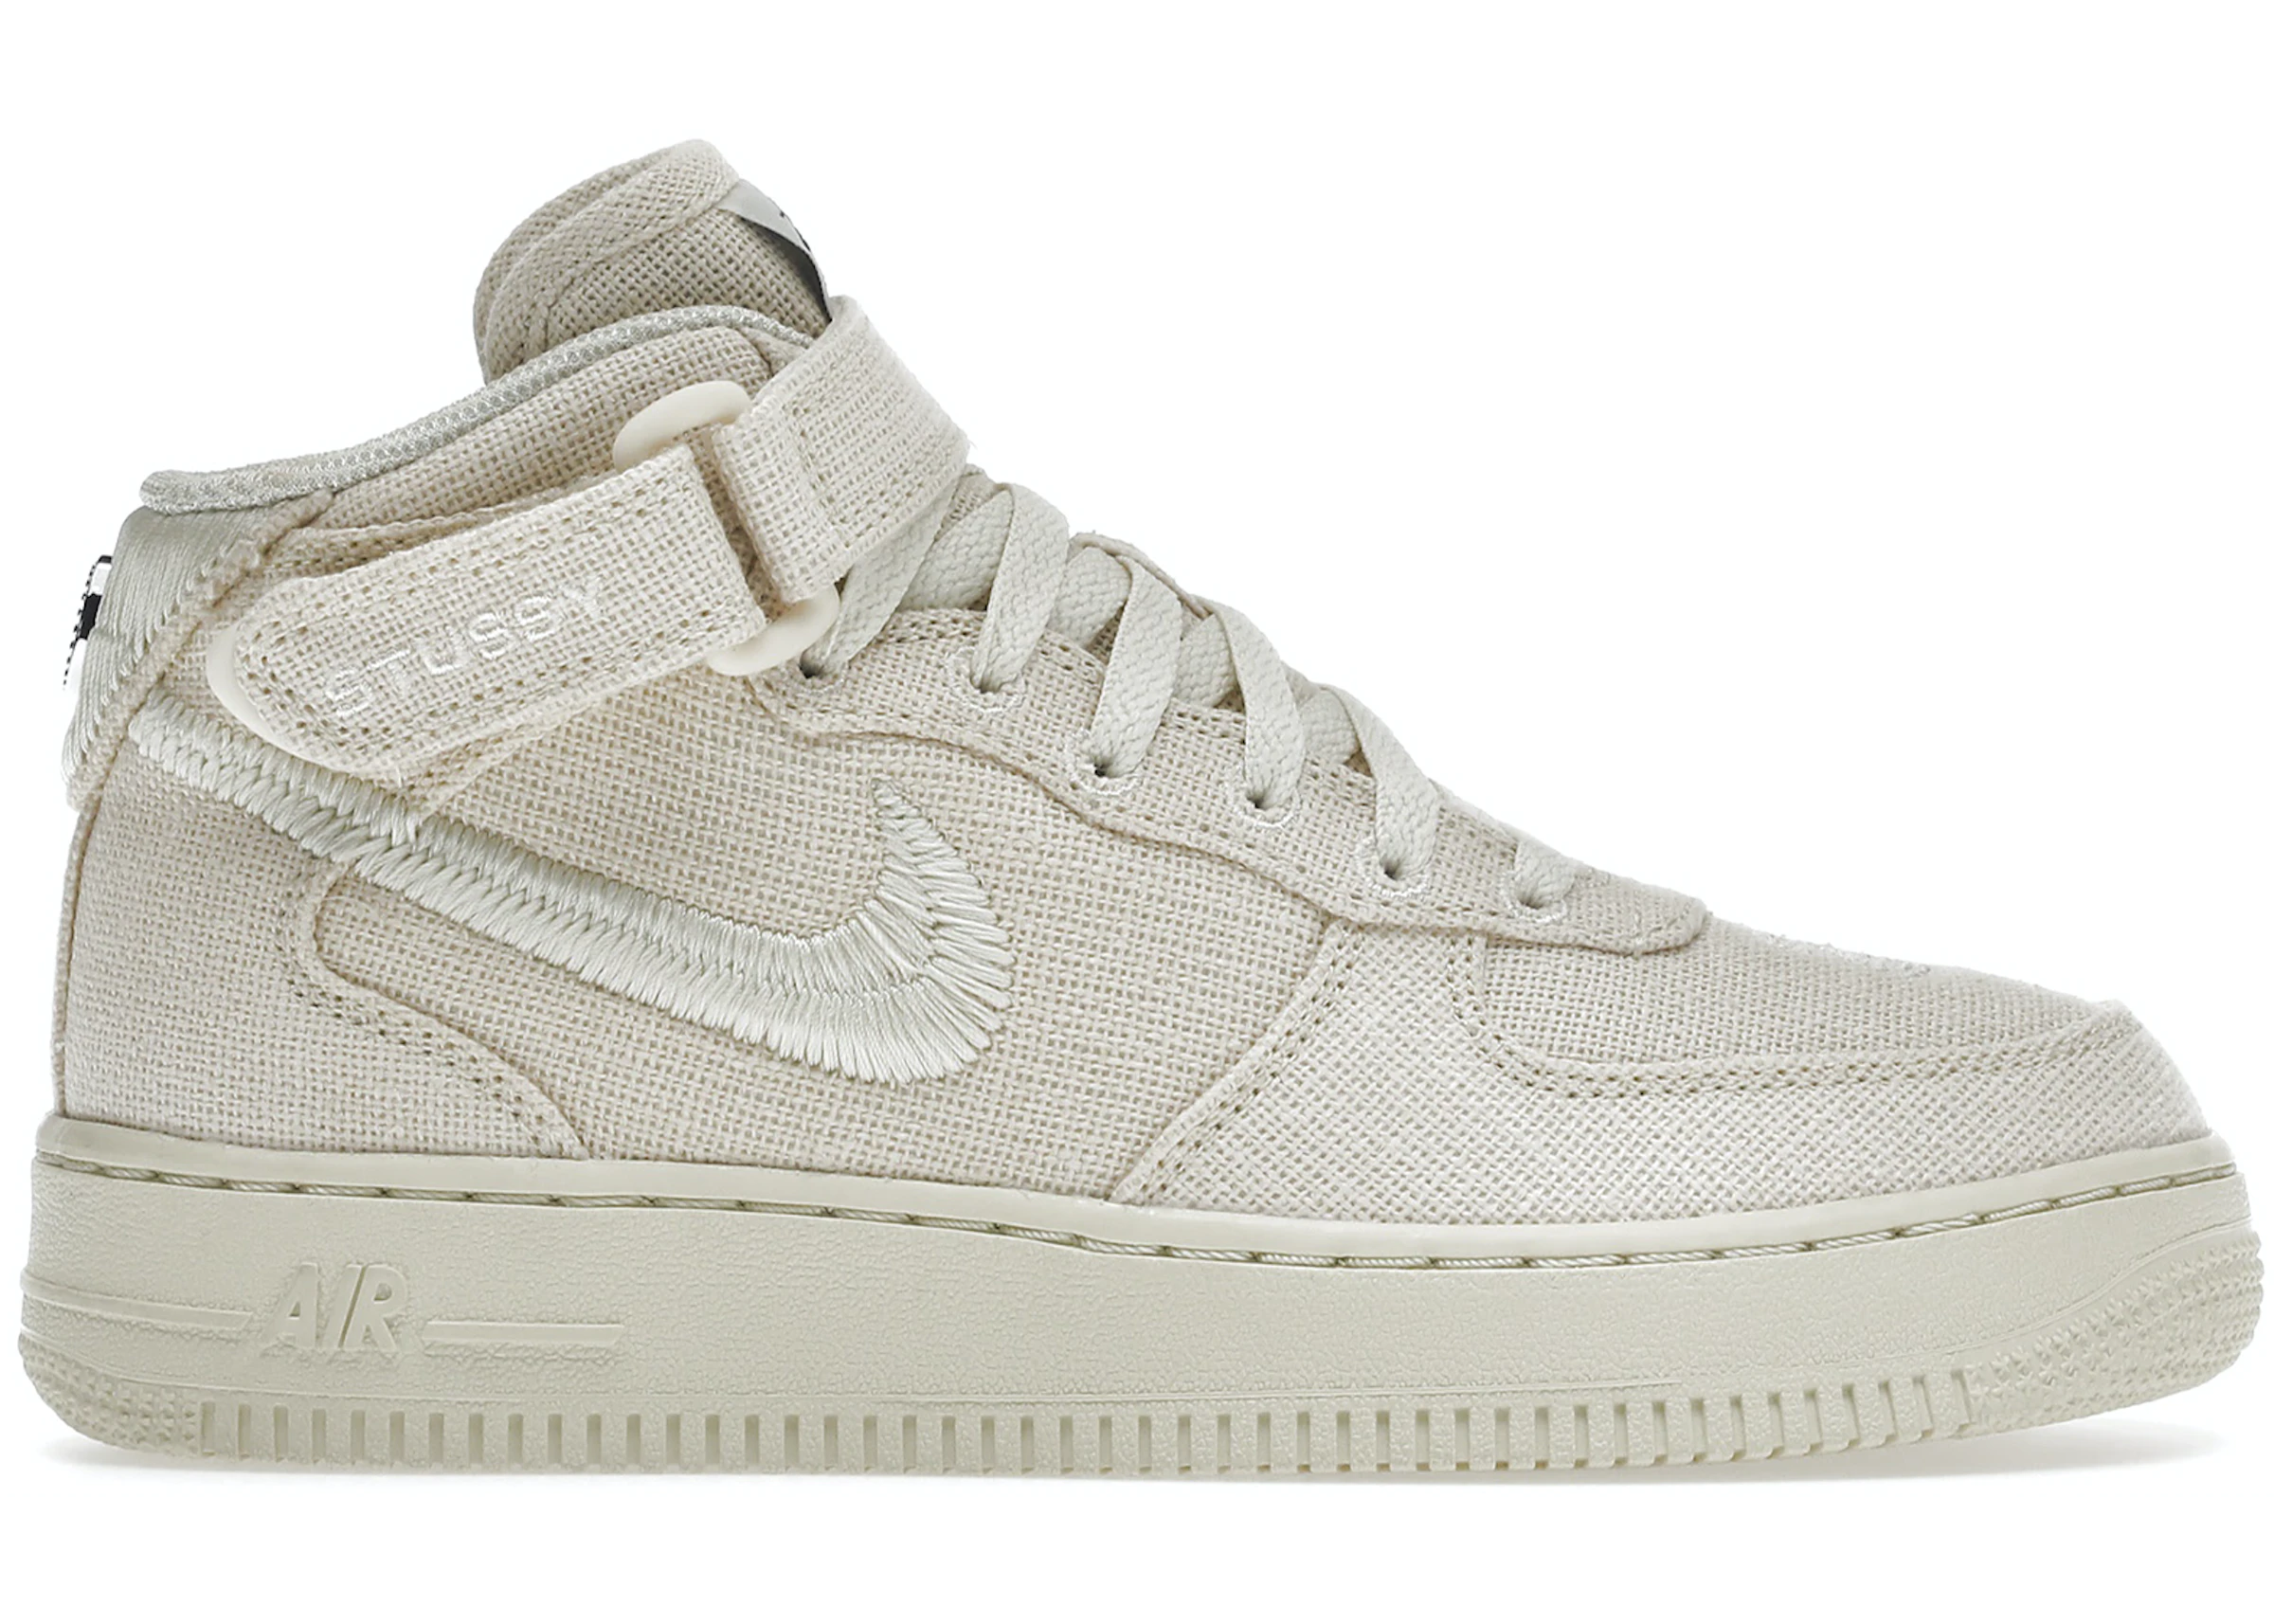 símbolo Doncella Lago taupo Nike Air Force 1 Mid Stussy Fossil - DJ7841-200 - ES